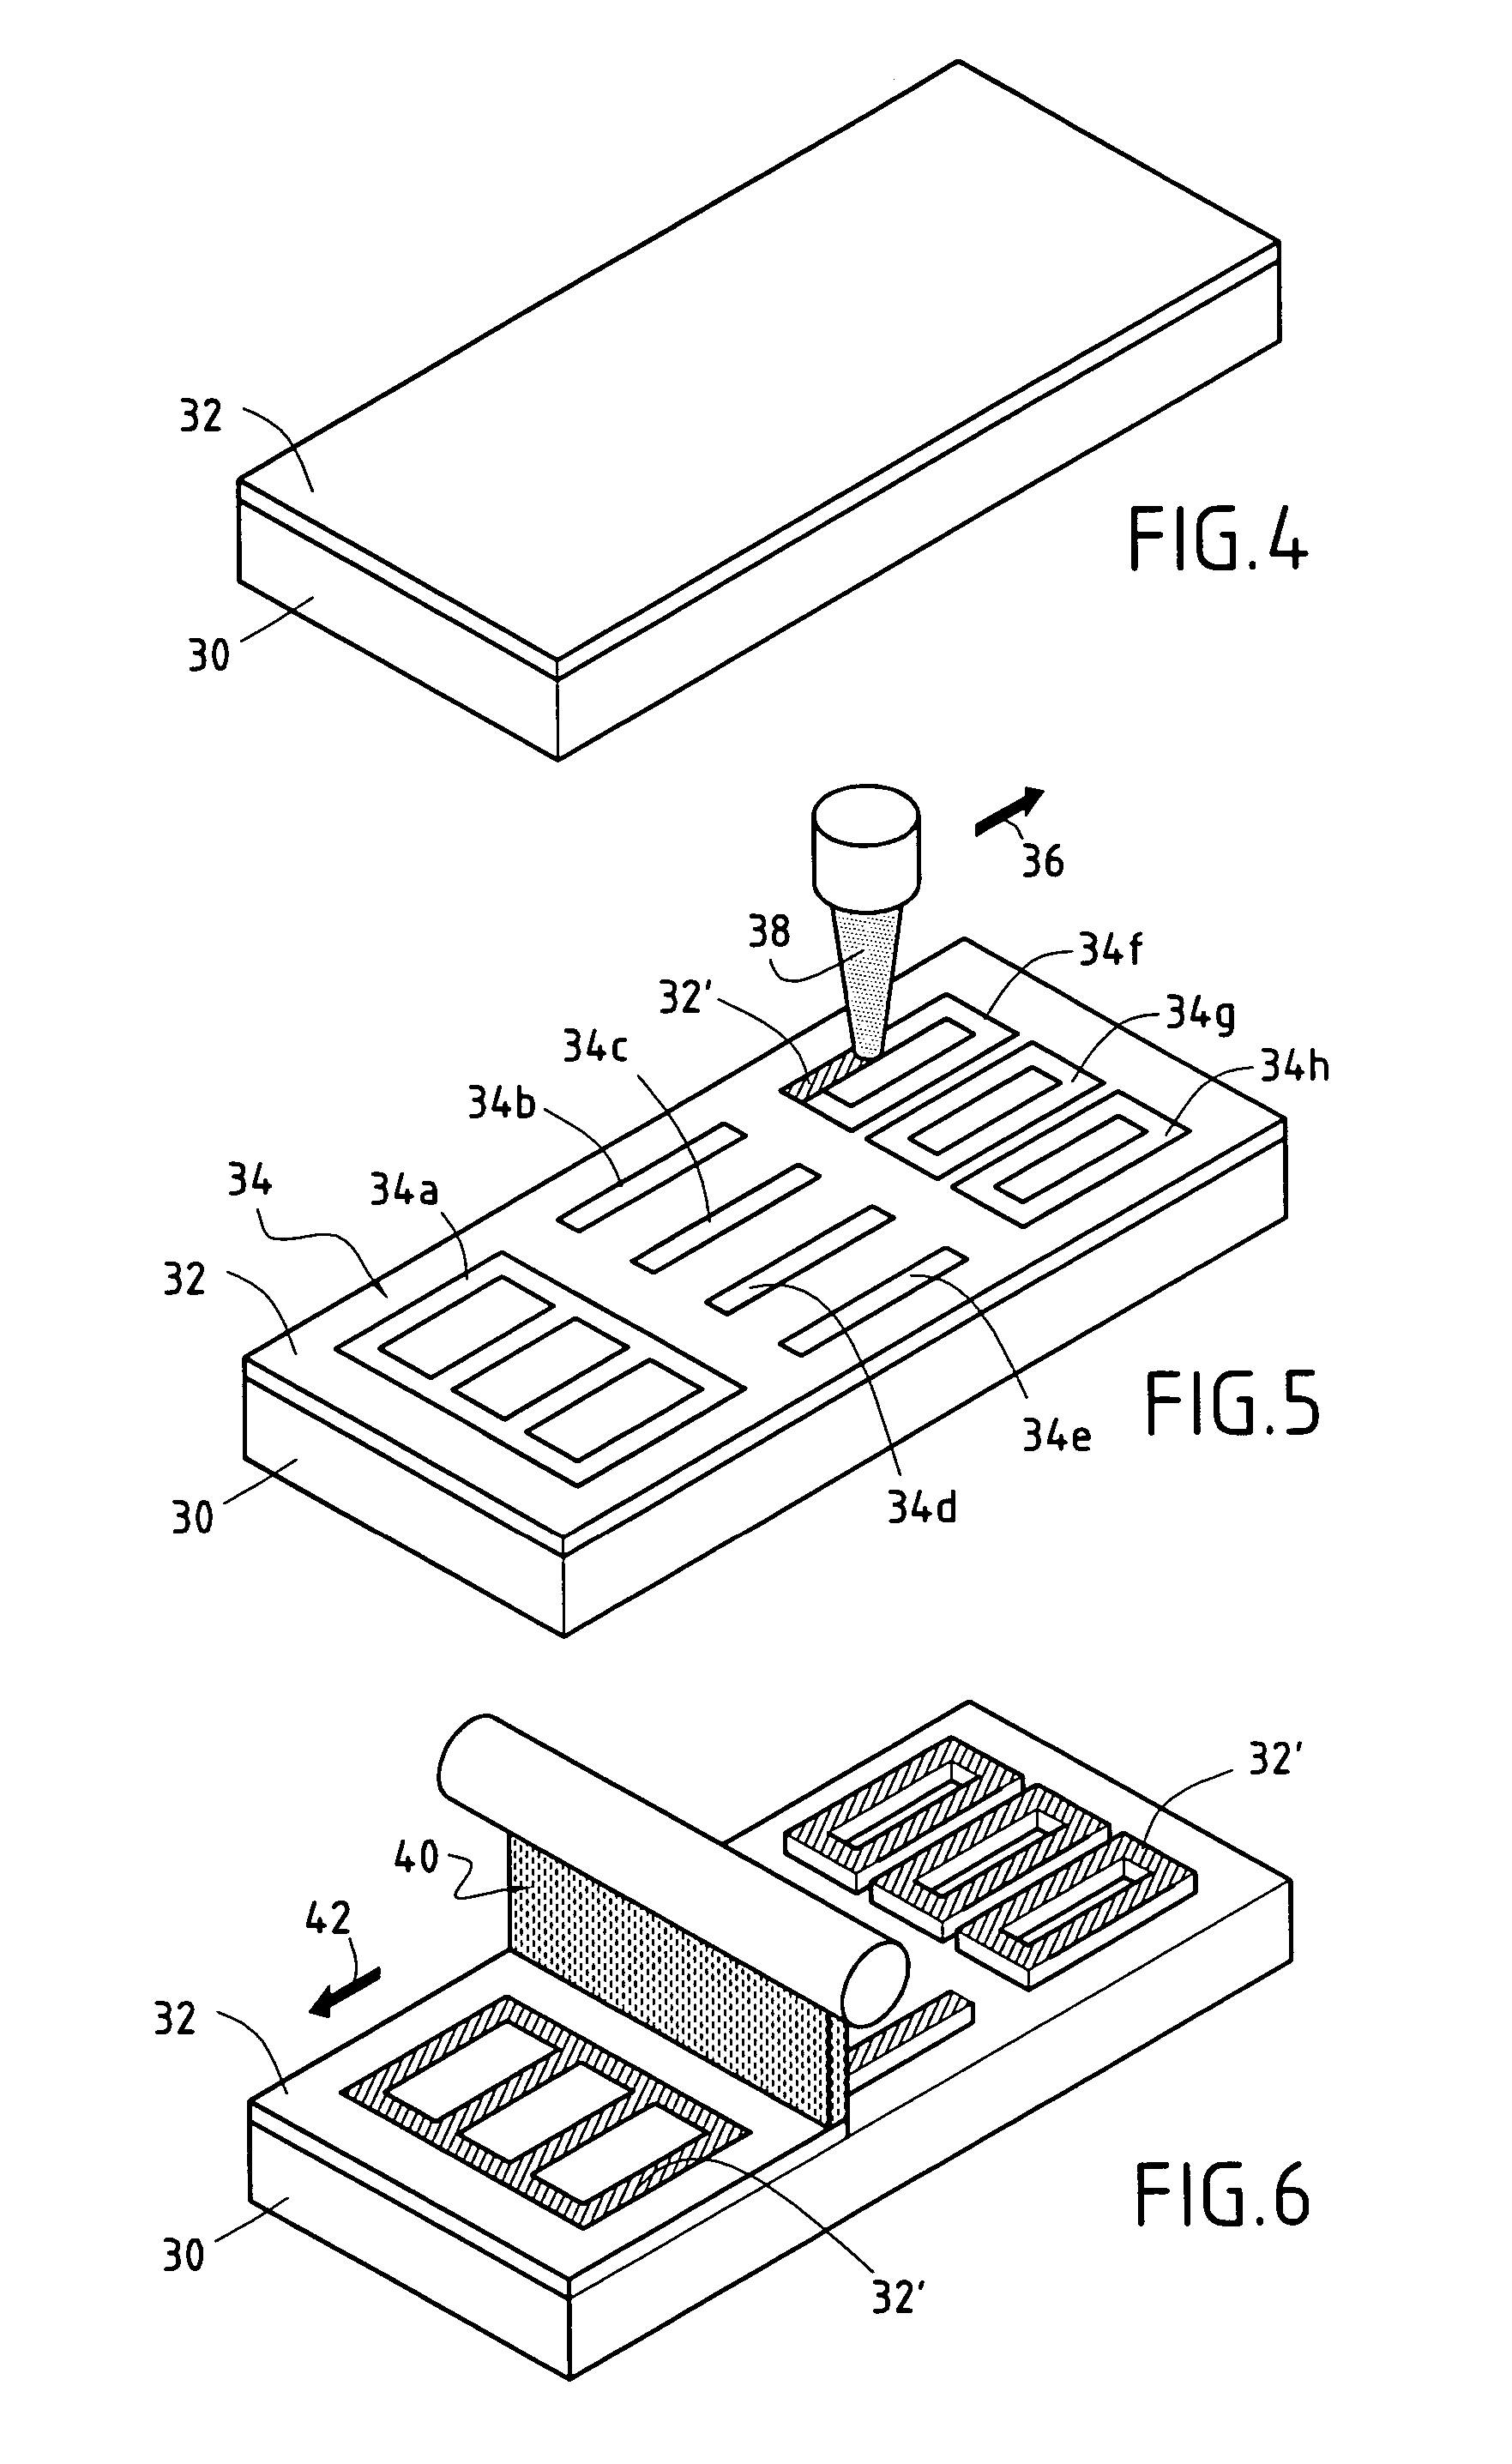 Method of fabricating a hollow mechanical part by diffusion welding and superplastic forming